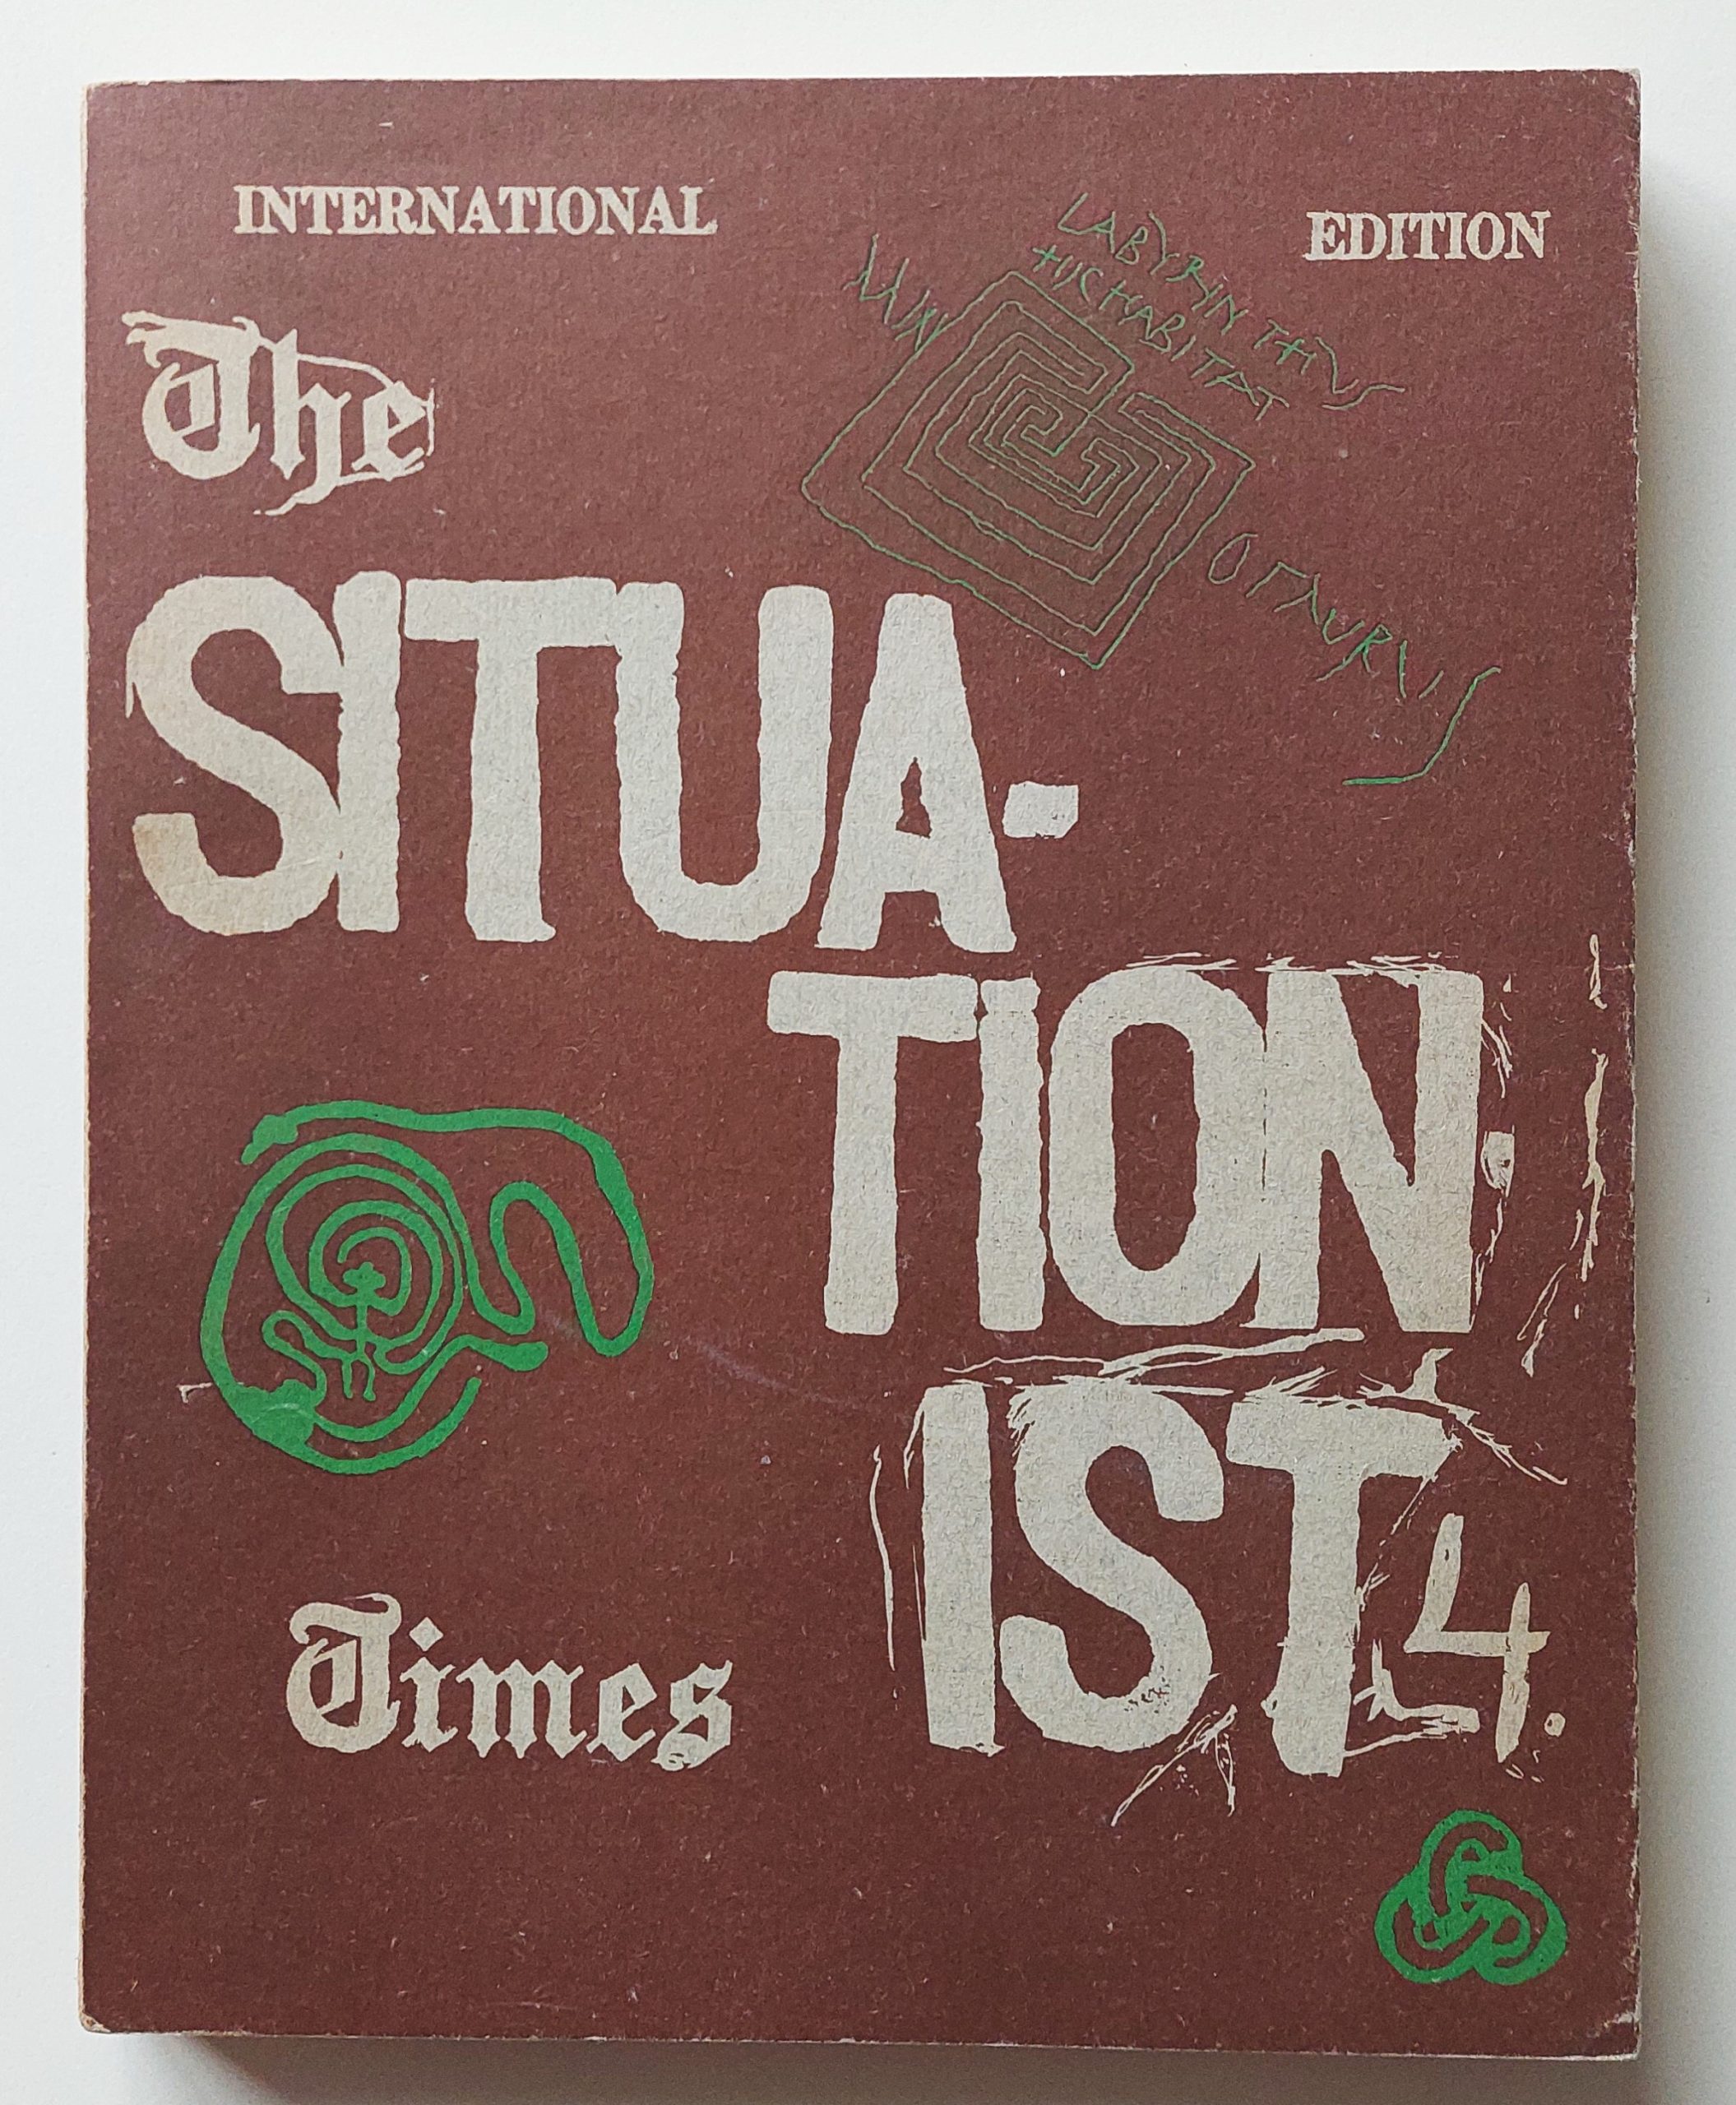 JACQUELINE DE JONG (EDITOR) - The Situationist Times 4